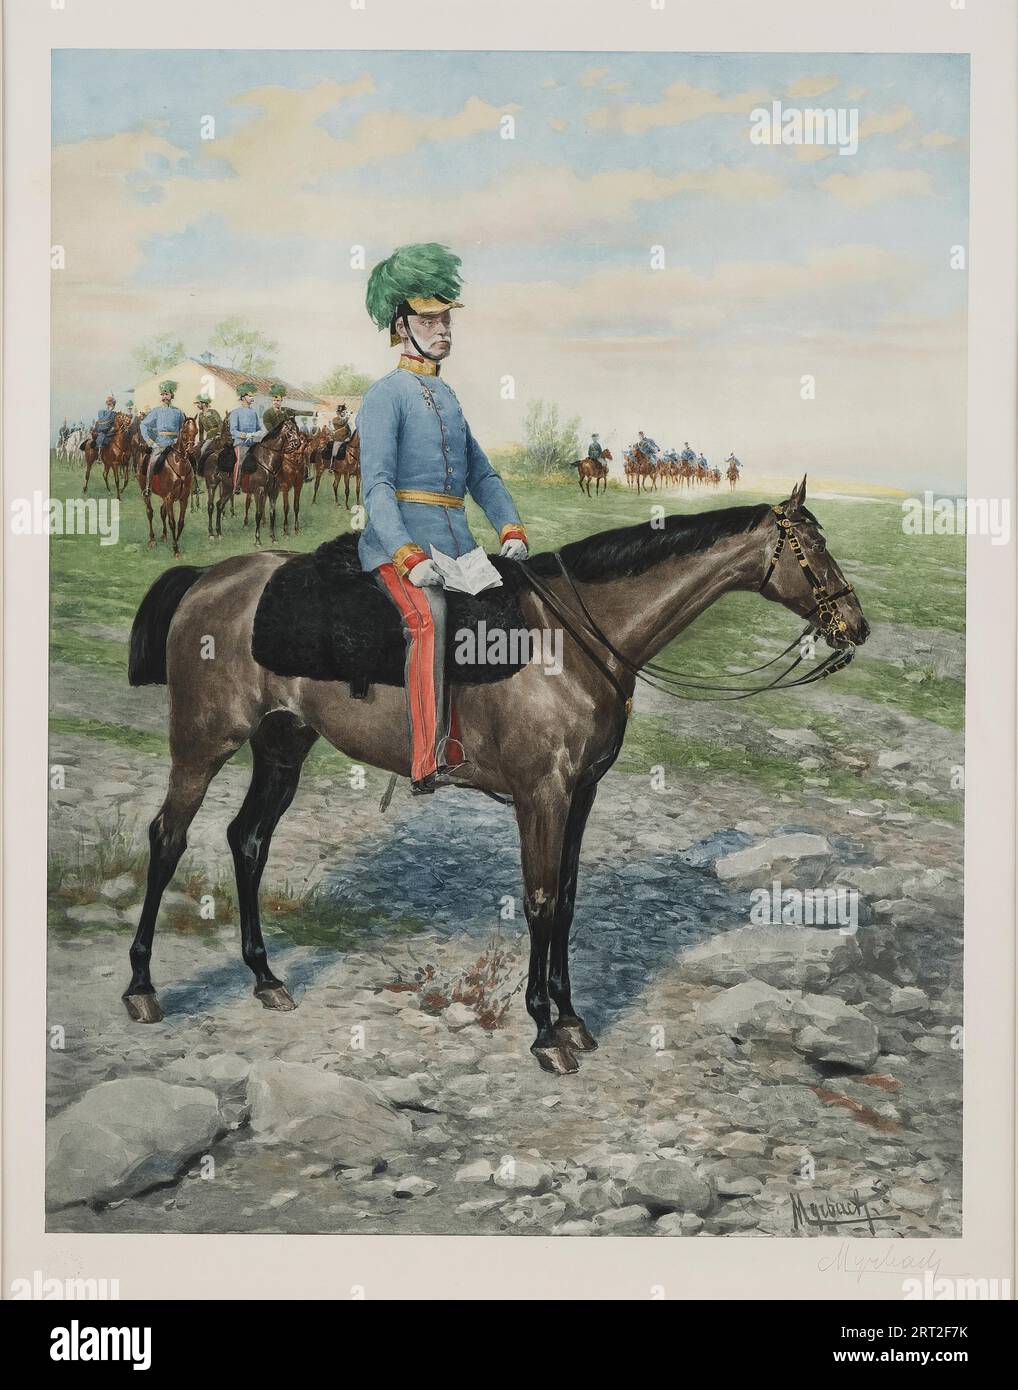 Archduke Albrecht of Austria (1817-1895) on the maneuver field, c.1900. Private Collection. Stock Photo